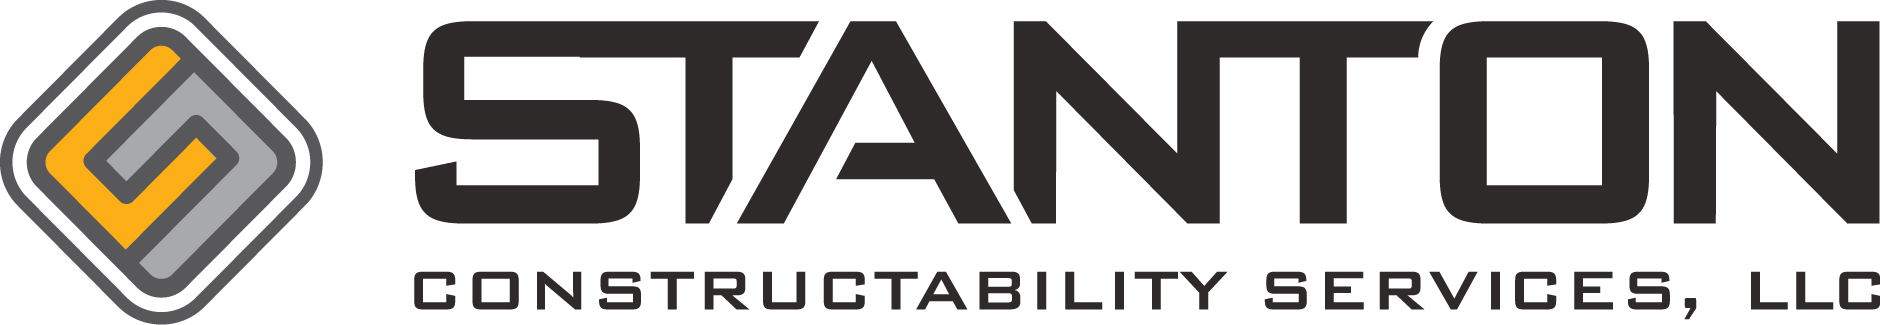 Stanton Constructability Services